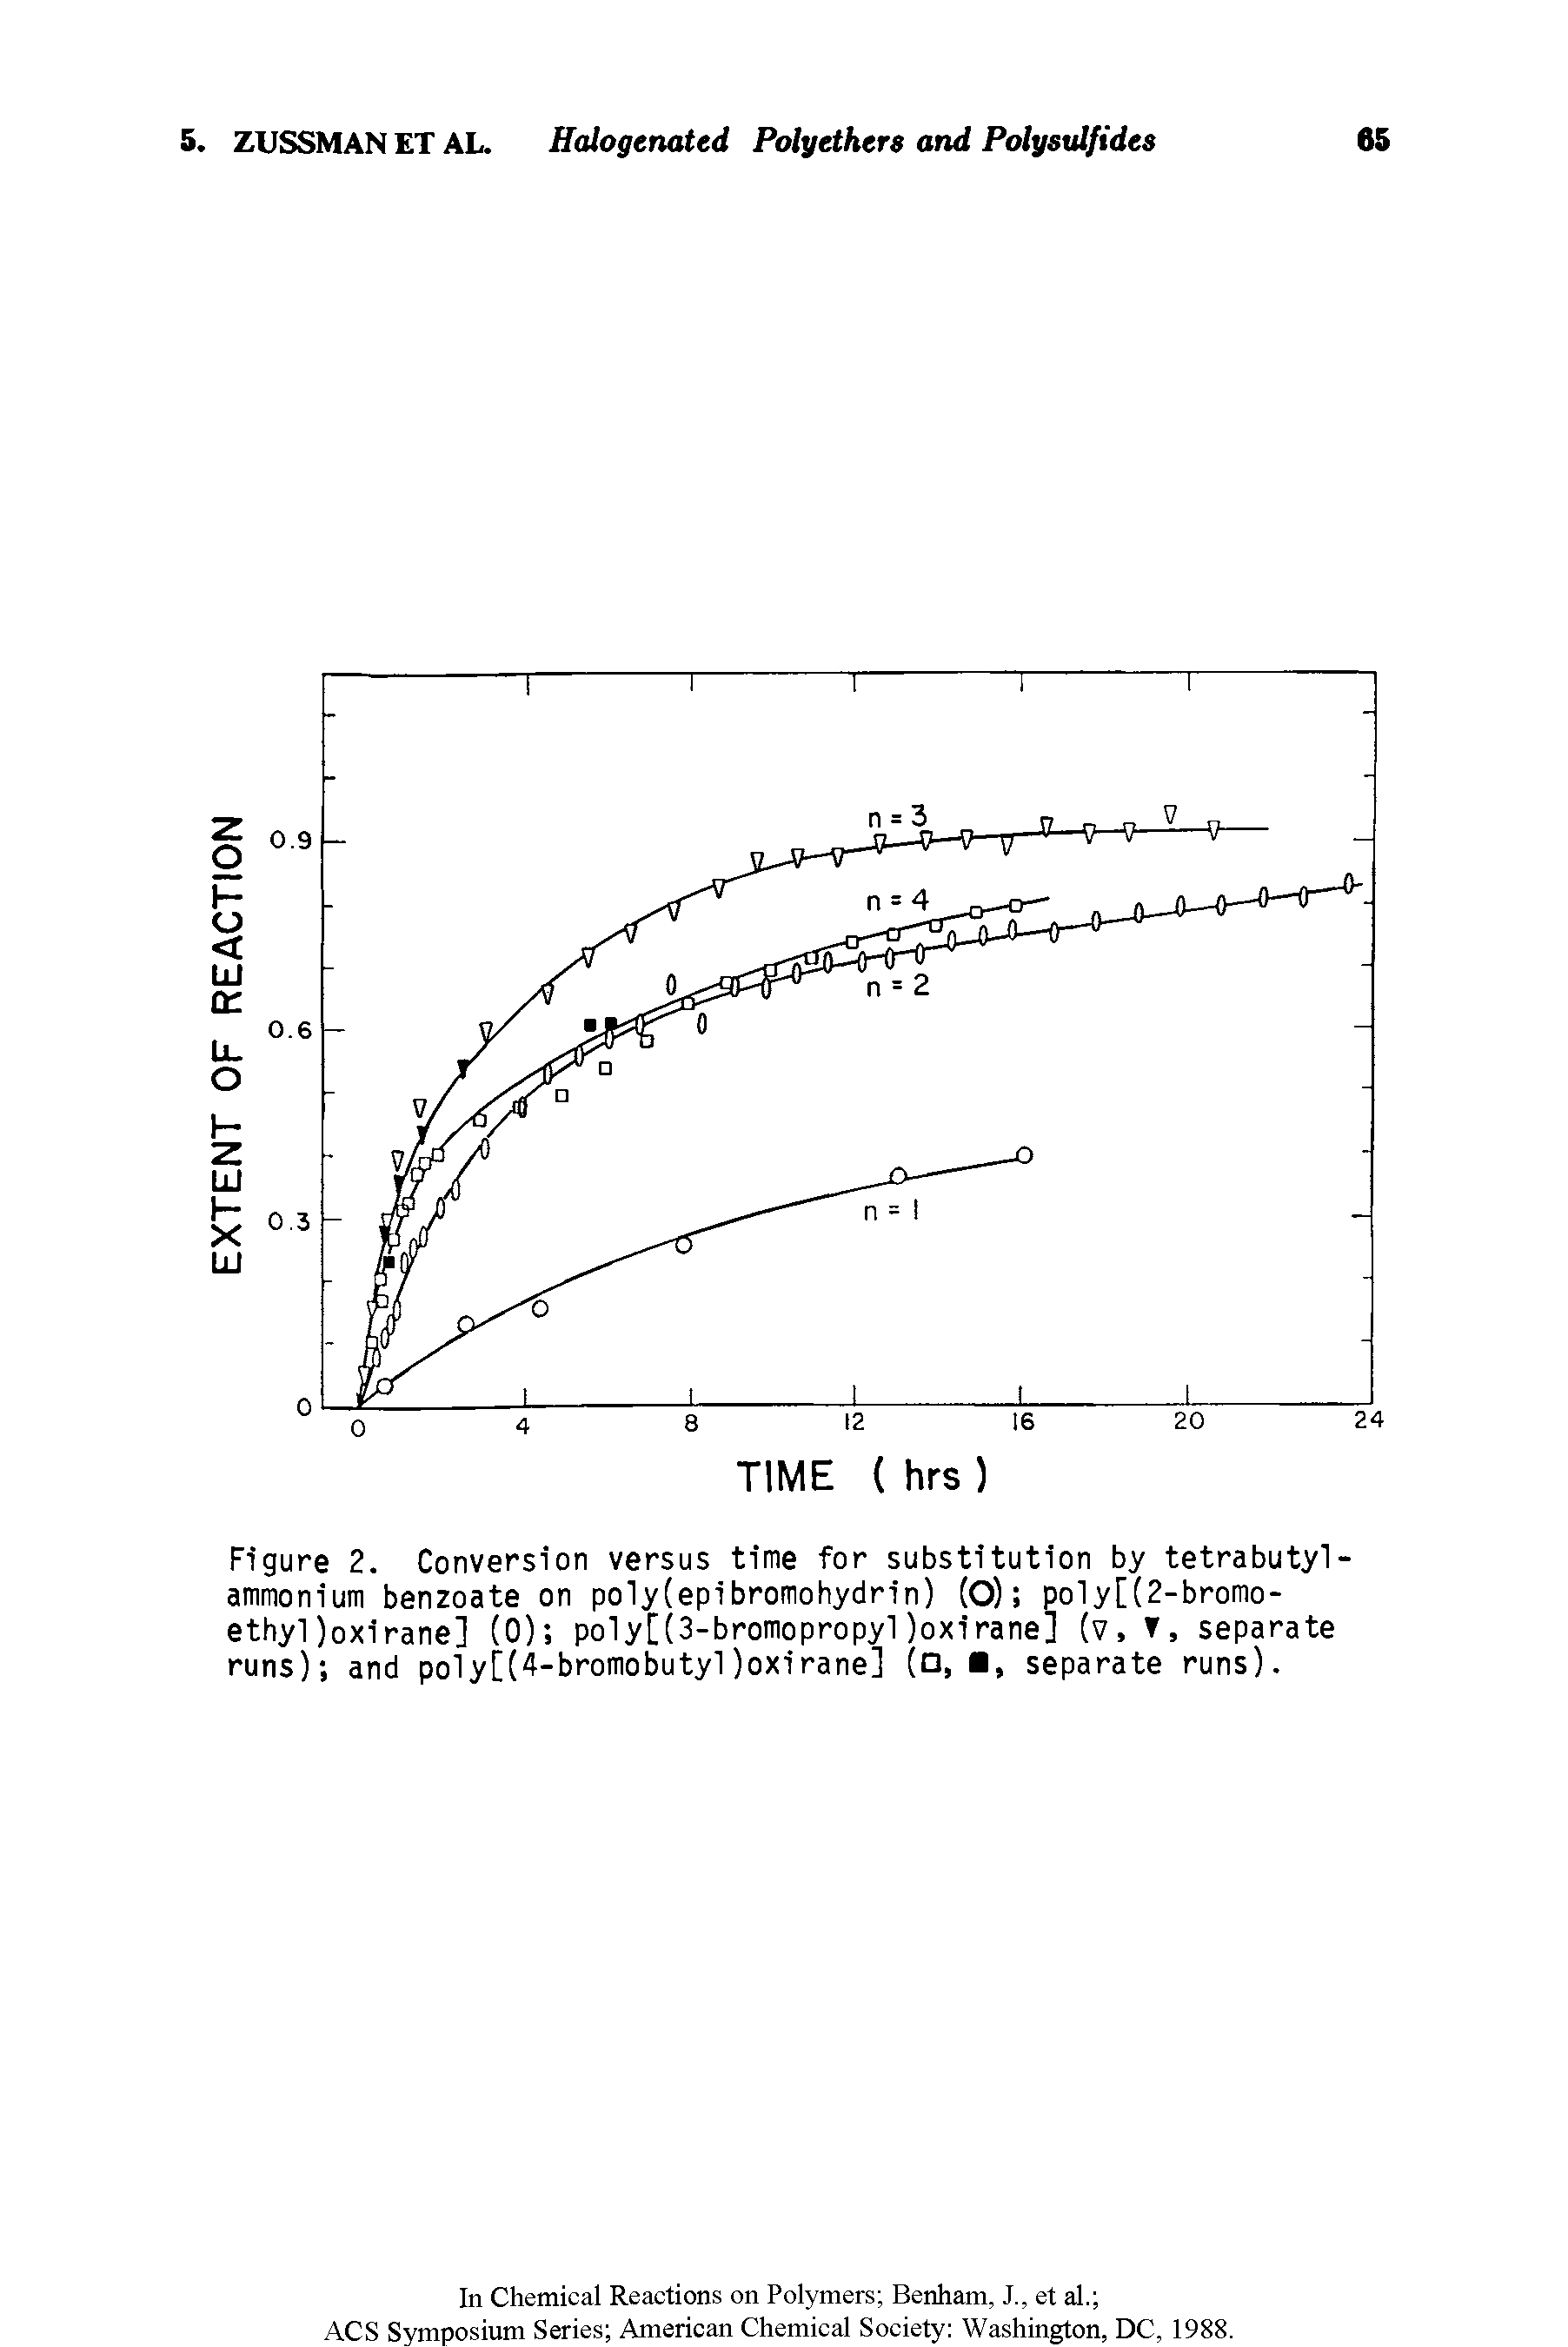 Figure 2. Conversion versus time for substitution by tetrabutyl-ammonium benzoate on poly(epibromohydrin) (O) poly[(2-bromo-ethyl )oxirane] (0) poly[(3-bromopropyl )oxirane] (v, , separate runs) and poly [(4-bromo butyl )oxirane] (a, , separate runs).